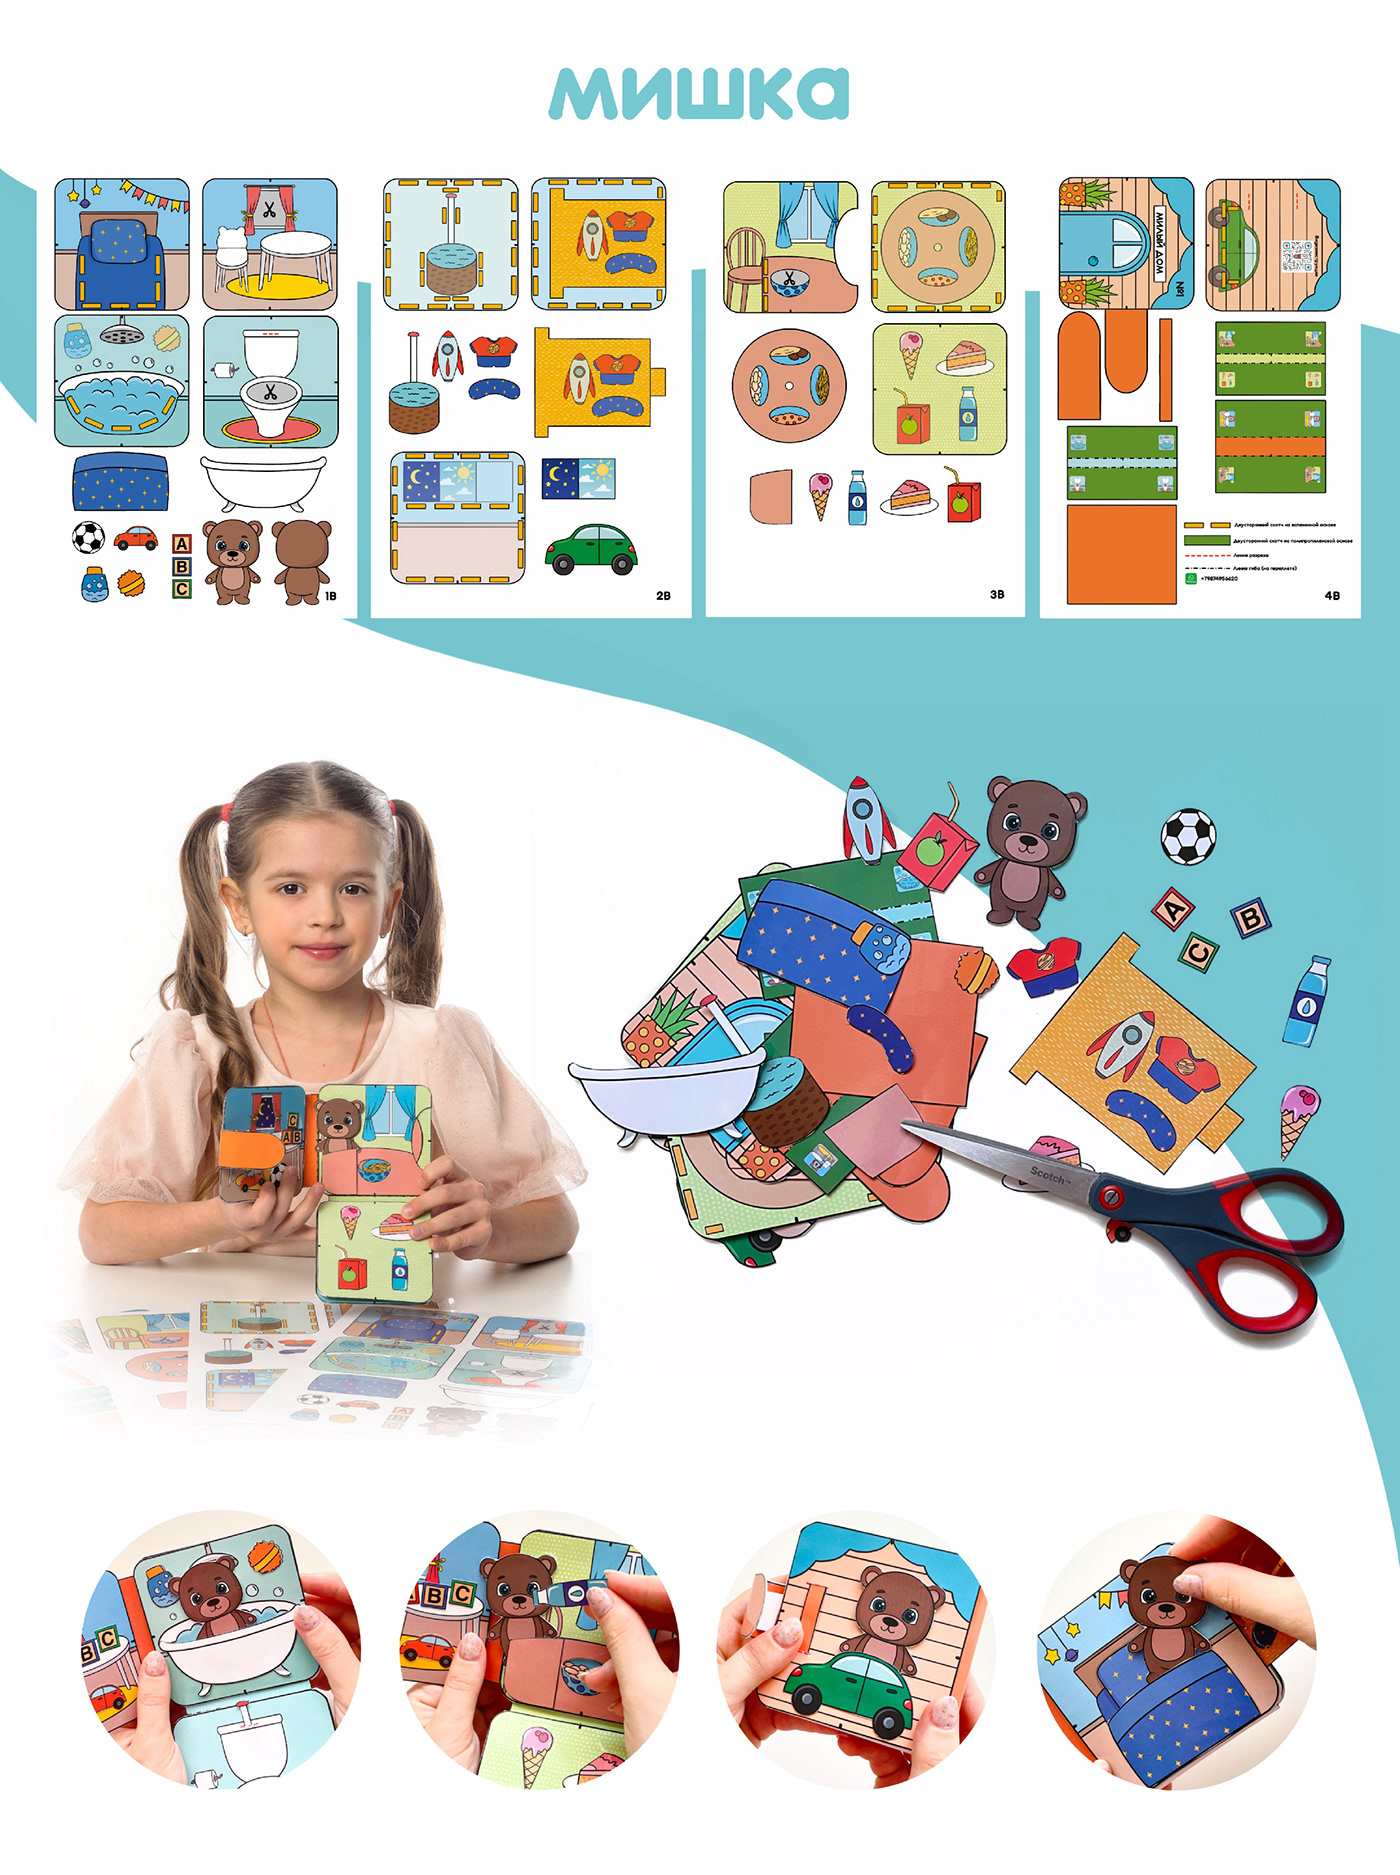 Children's educational games and toys